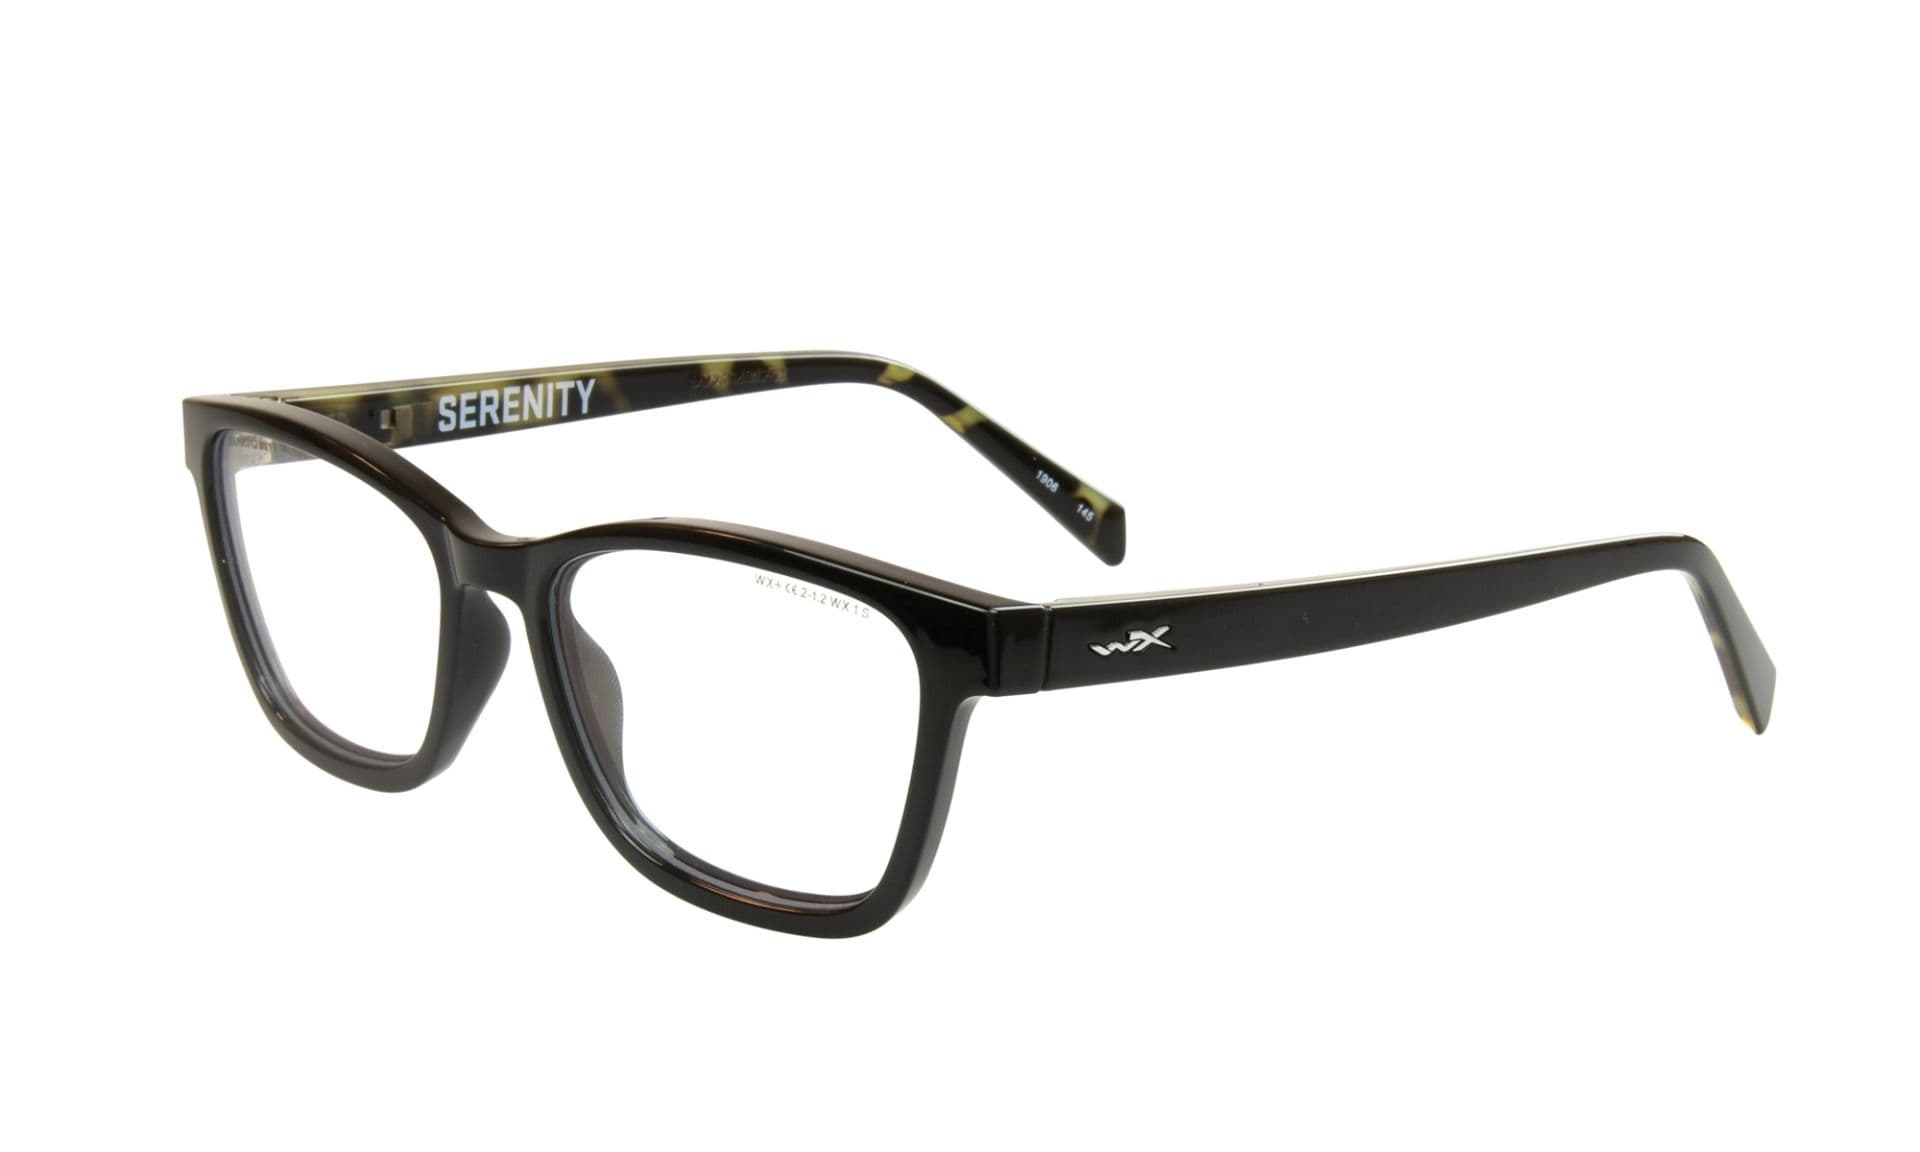 Wiley-X WX Serenity Safety Glasses